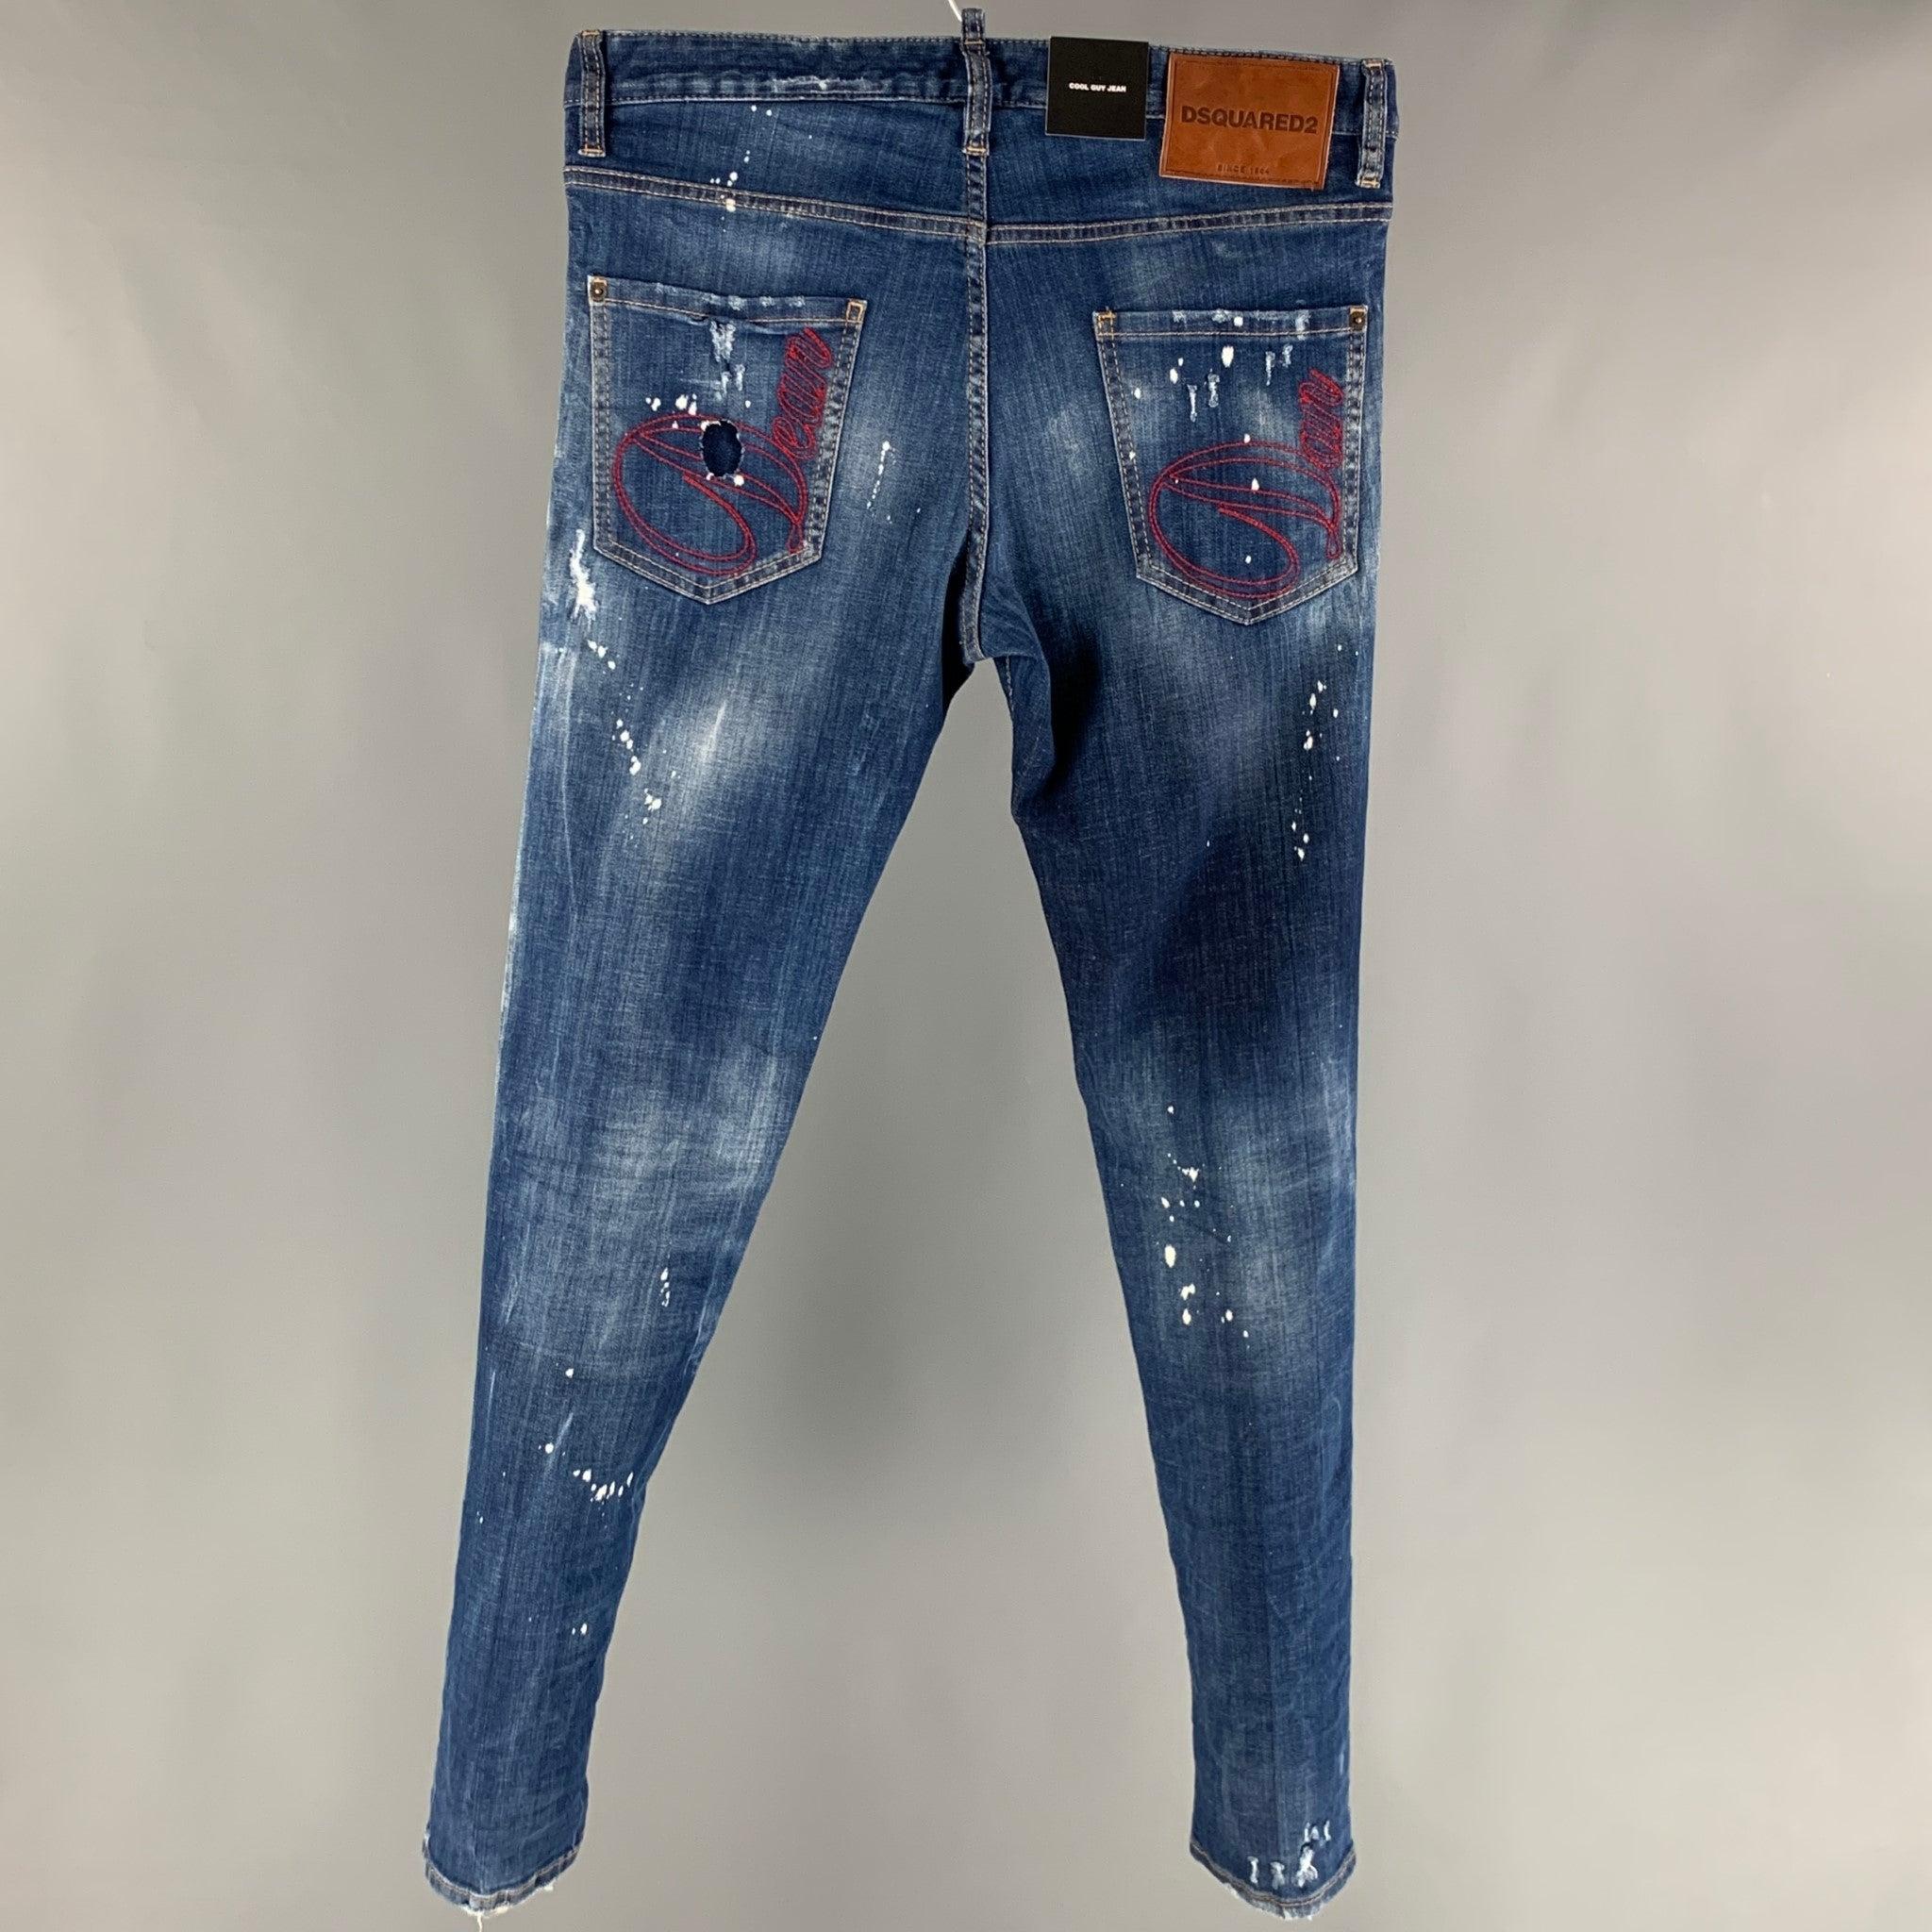 DSQUARED2 jeans comes in an indigo distressed cotton and elastane denim featuring a long crotch, paint splatter details, contrast stitching, and a button fly closure. Made in Italy.New with Tags. 

Marked:   48 

Measurements: 
  Waist: 34 inches